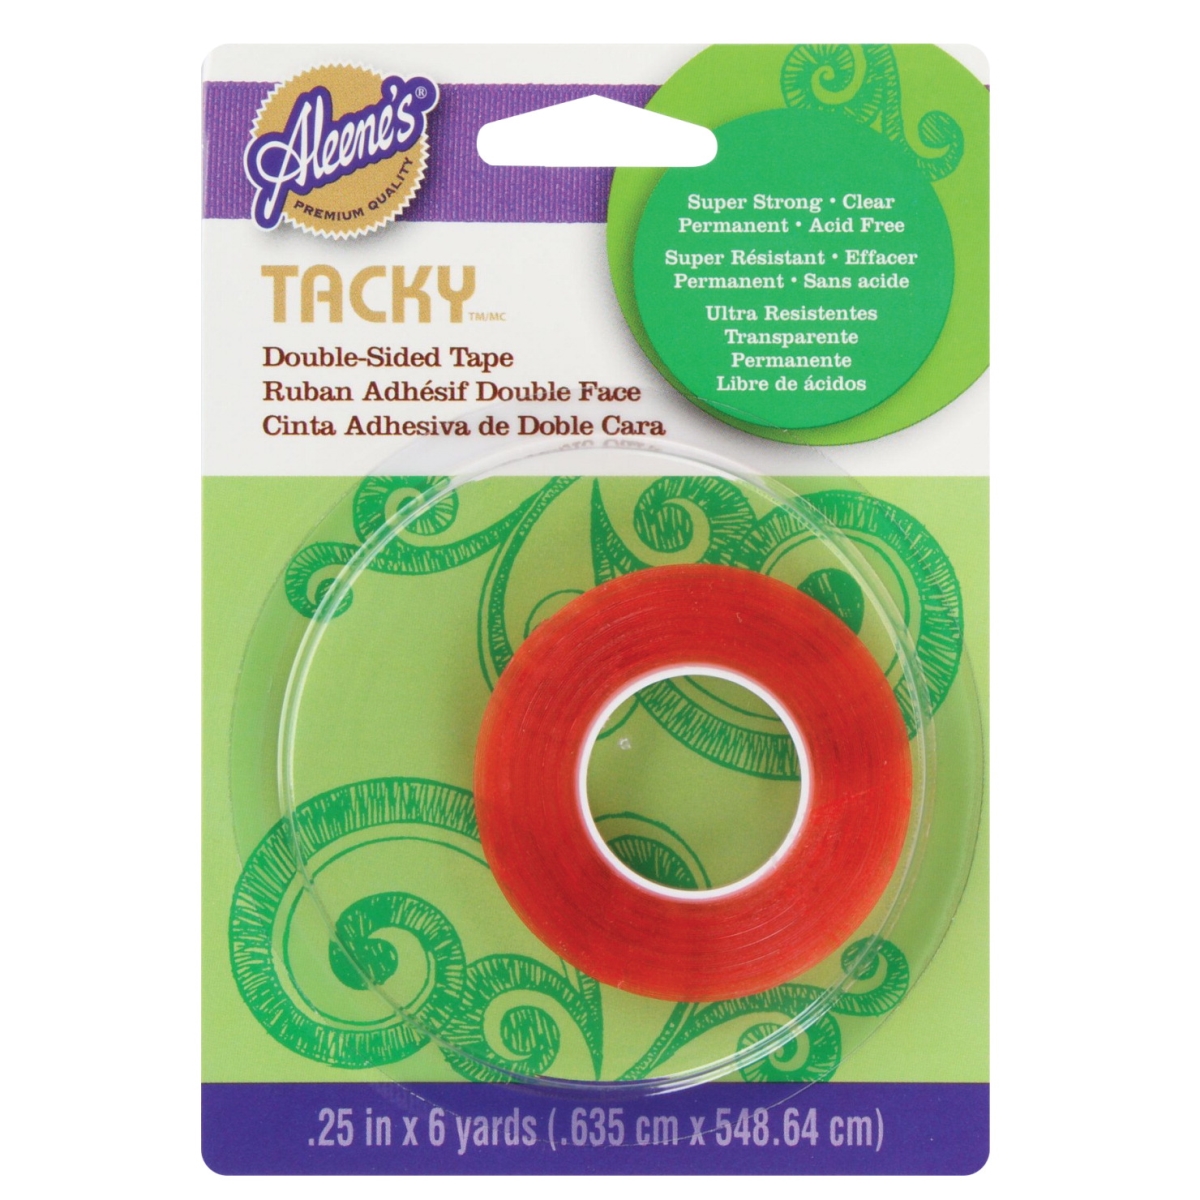 1499638 0.25 In. X 6 Yards Double Sided Tacky Tape, Red